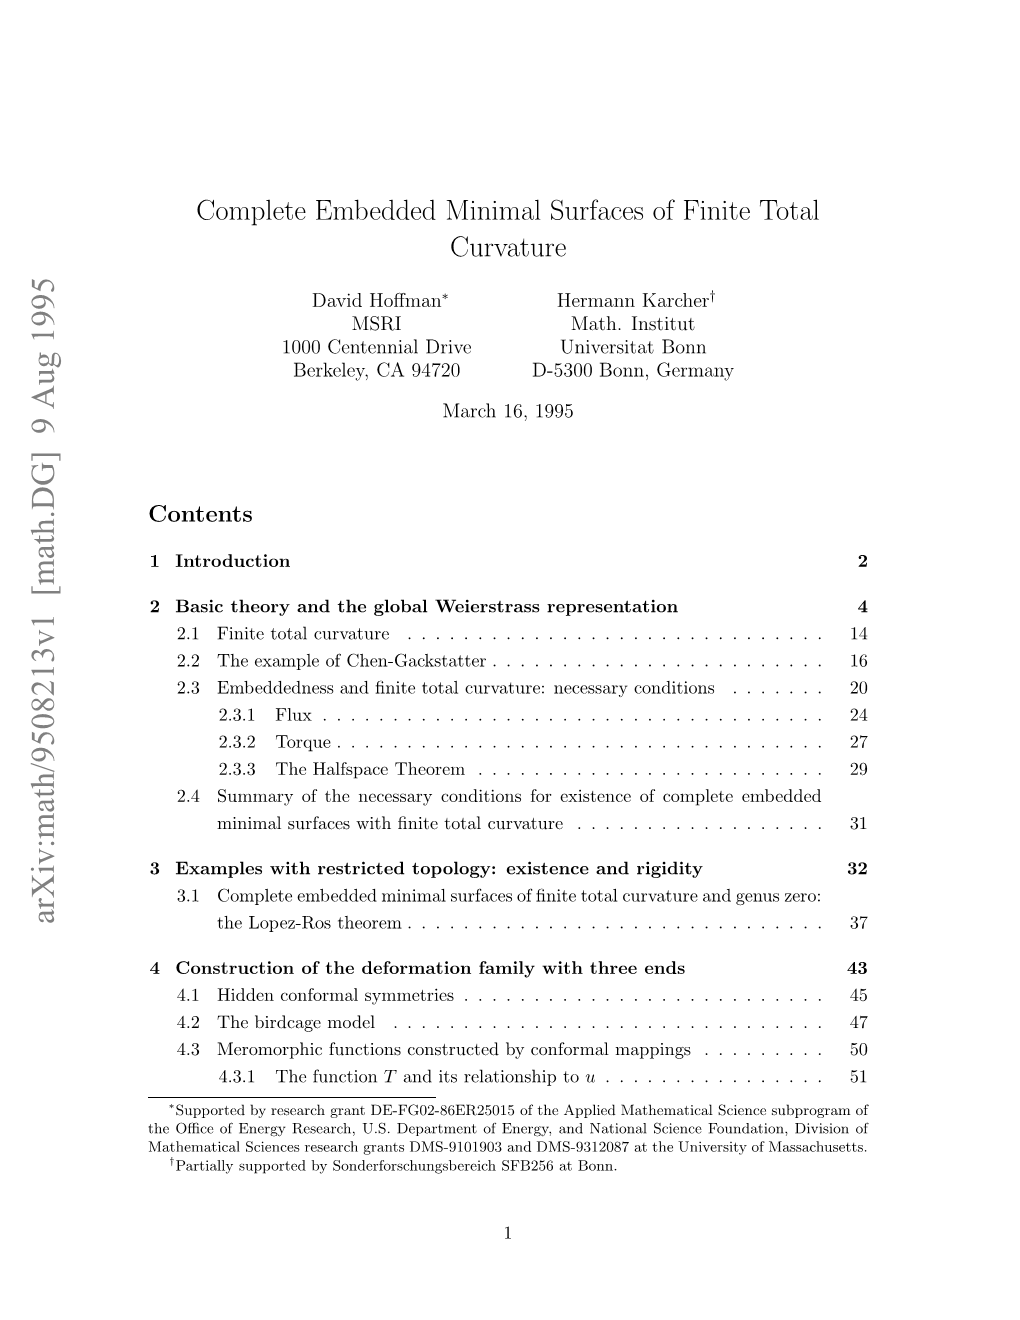 Complete Embedded Minimal Surfaces of Finite Total Curvature